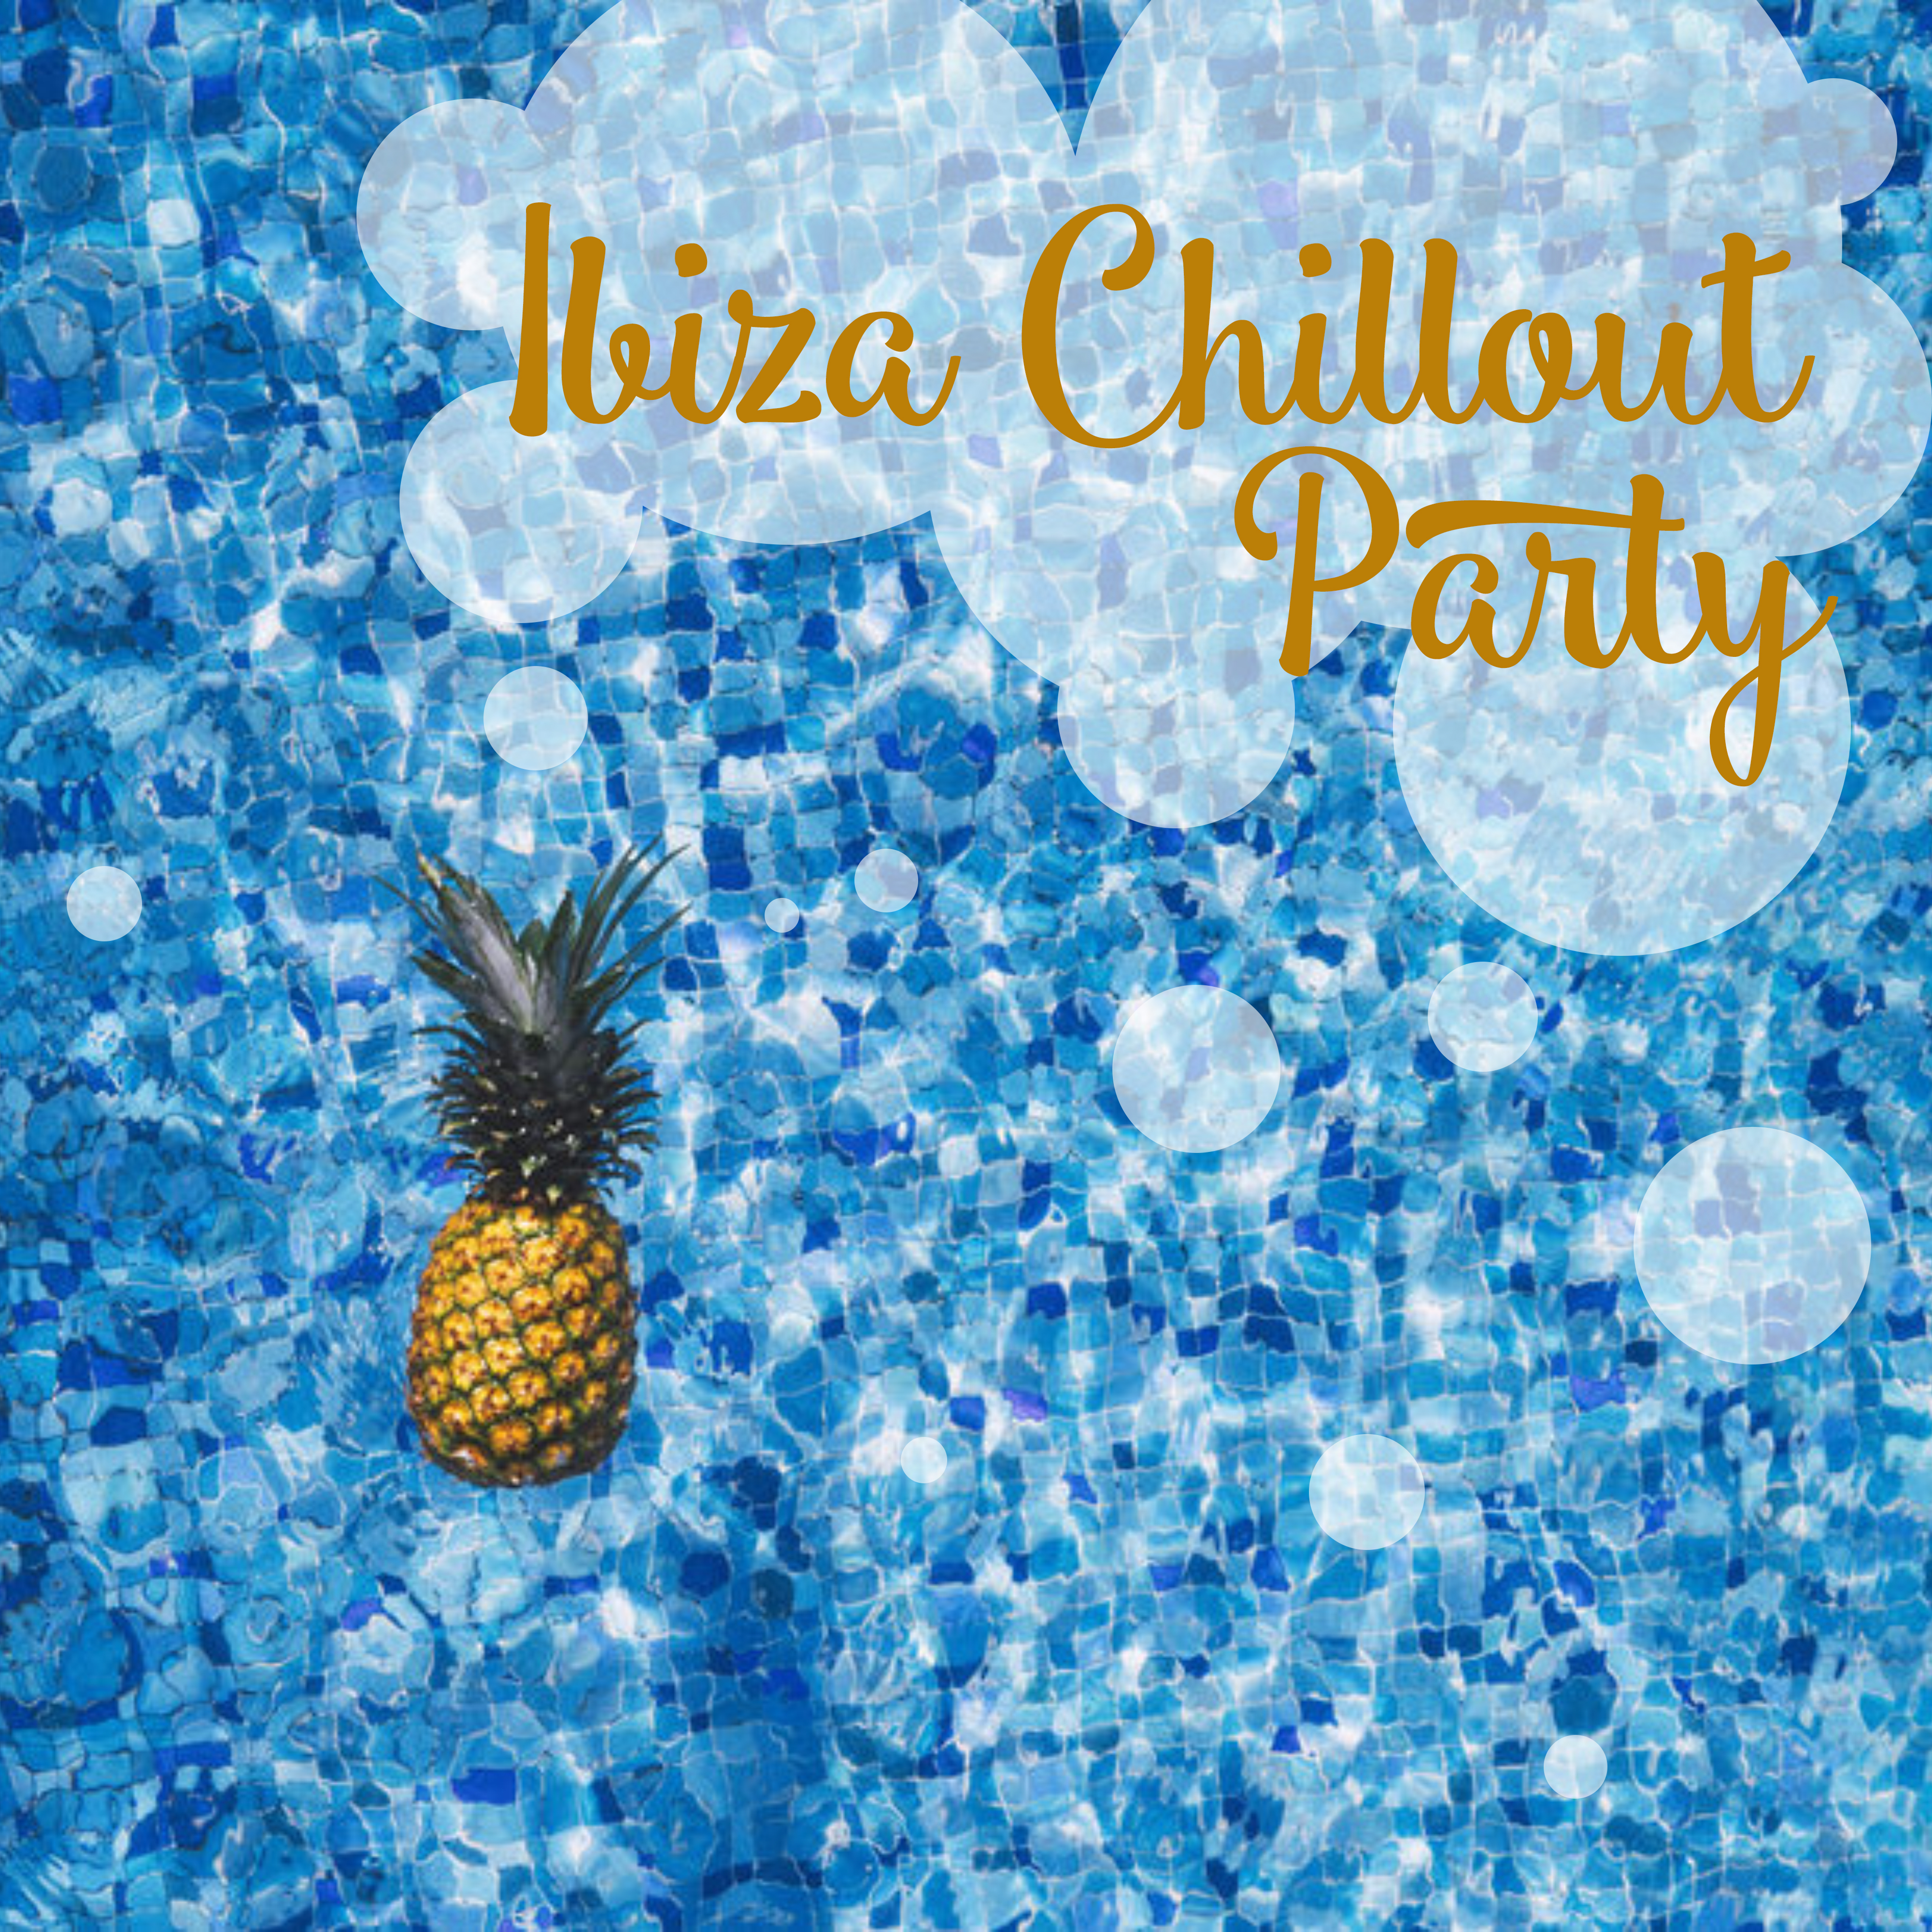 Ibiza Chillout Party – Ibiza Vibes, Chill Out Hits, Best of Chill, Drink Bar